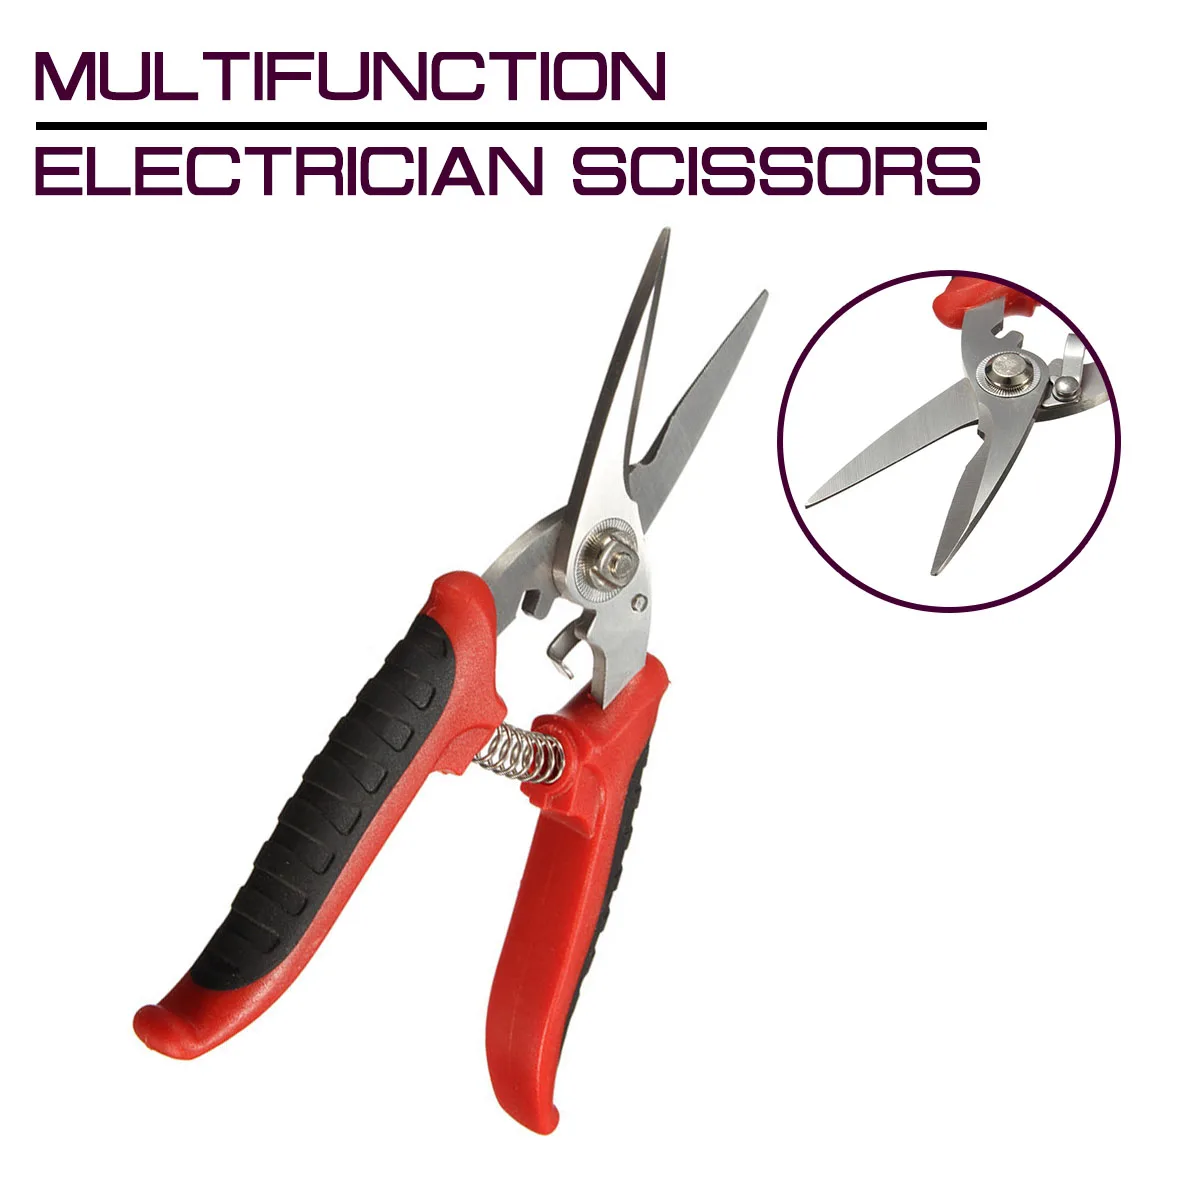 

Stainless Steel Electrician Scissors Multifunction Manually Shears Groove Cutting Wire and Thin steel Plate Hand Tools